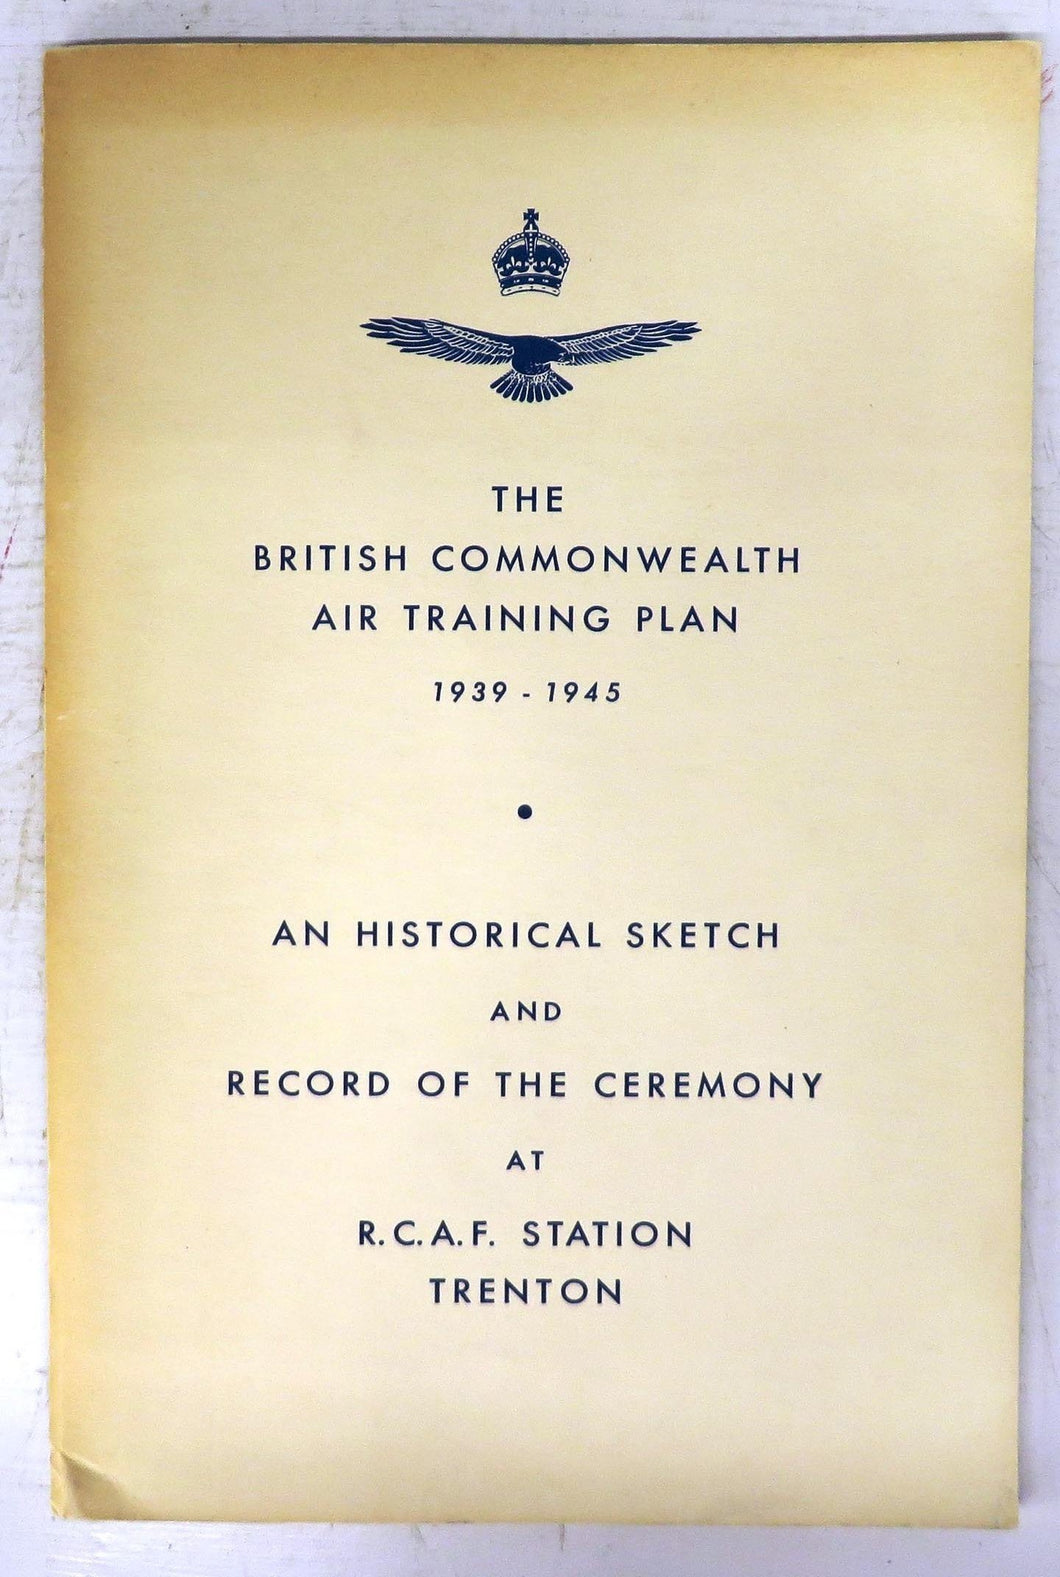 The British Commonwealth Air Training Plan 1939-1945: An Historical Sketch and Record of the Ceremony at R.C.A.F. Station Trenton